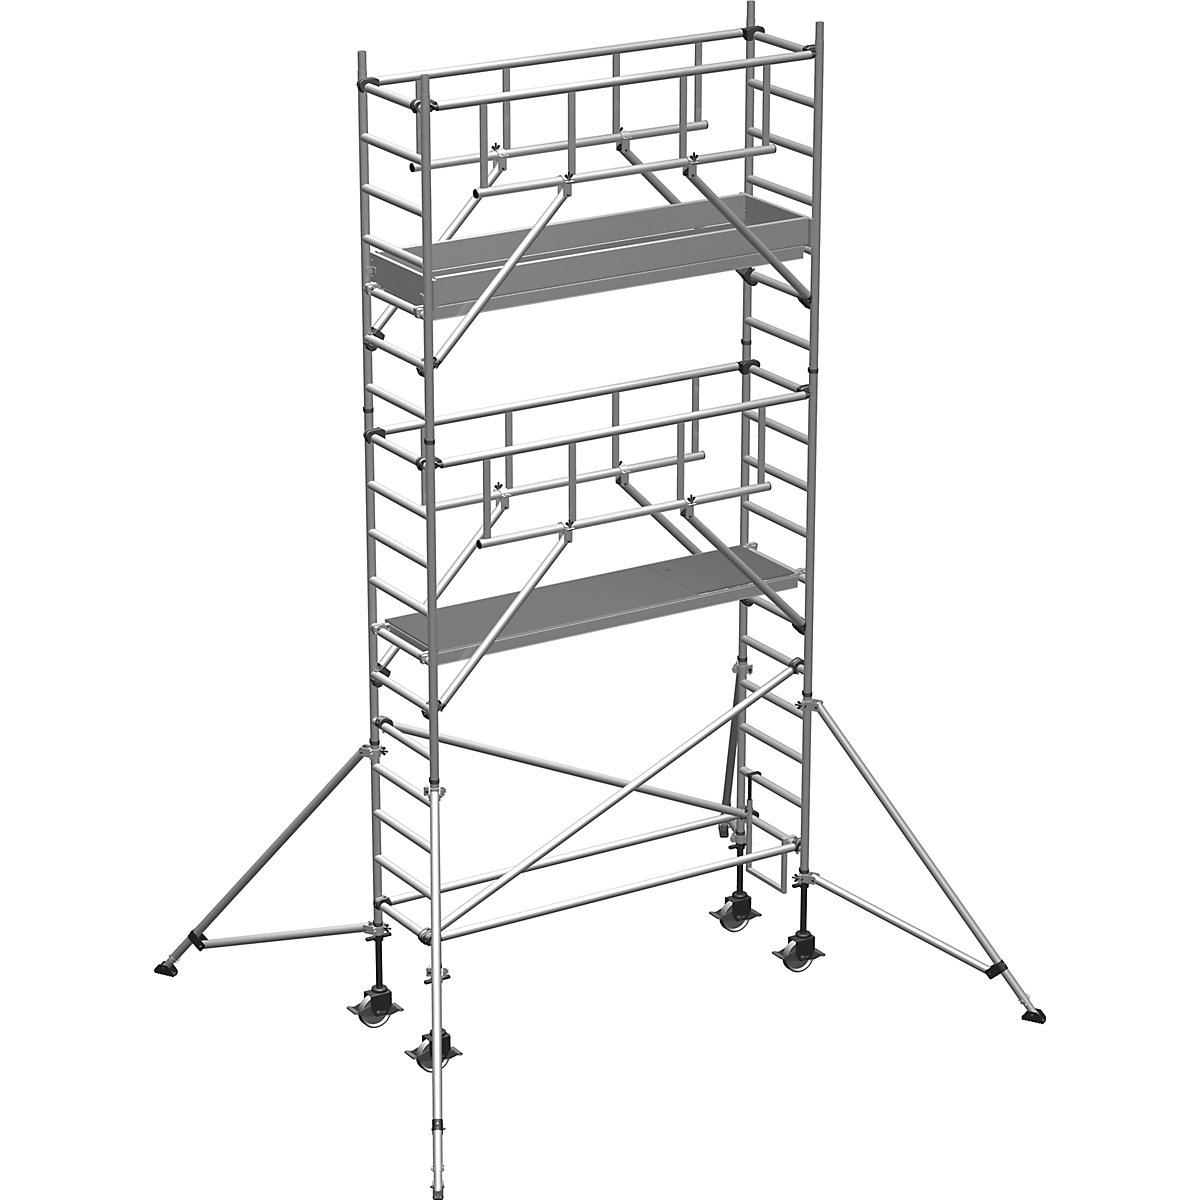 S-PLUS mobile access tower – ZARGES, platform 1.80 x 0.60 m, working height 6.45 m-11